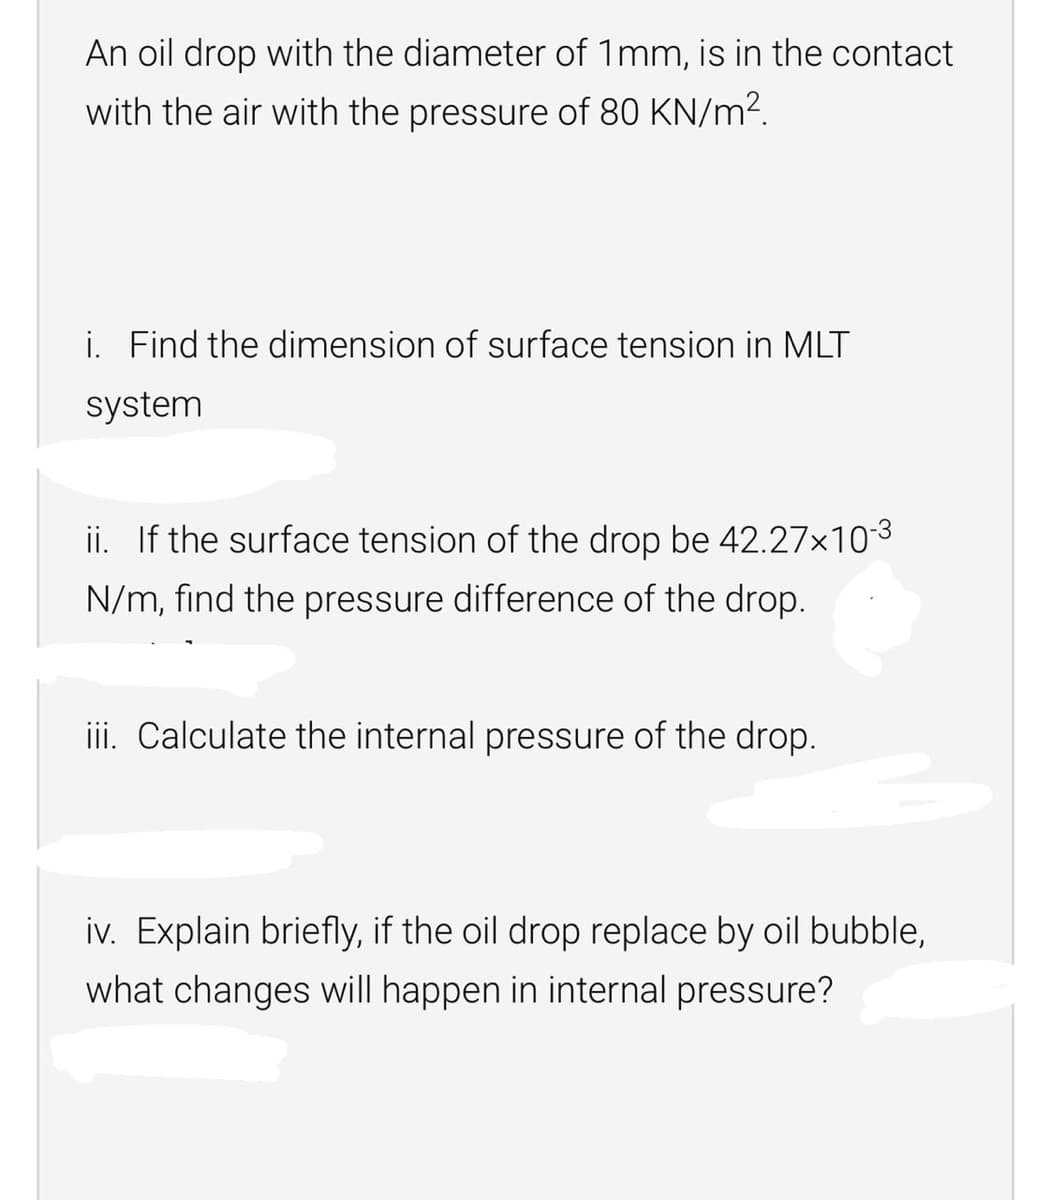 An oil drop with the diameter of 1mm, is in the contact
with the air with the pressure of 80 KN/m2.
i. Find the dimension of surface tension in MLT
system
ii. If the surface tension of the drop be 42.27x103
N/m, find the pressure difference of the drop.
iii. Calculate the internal pressure of the drop.
iv. Explain briefly, if the oil drop replace by oil bubble,
what changes will happen in internal pressure?
